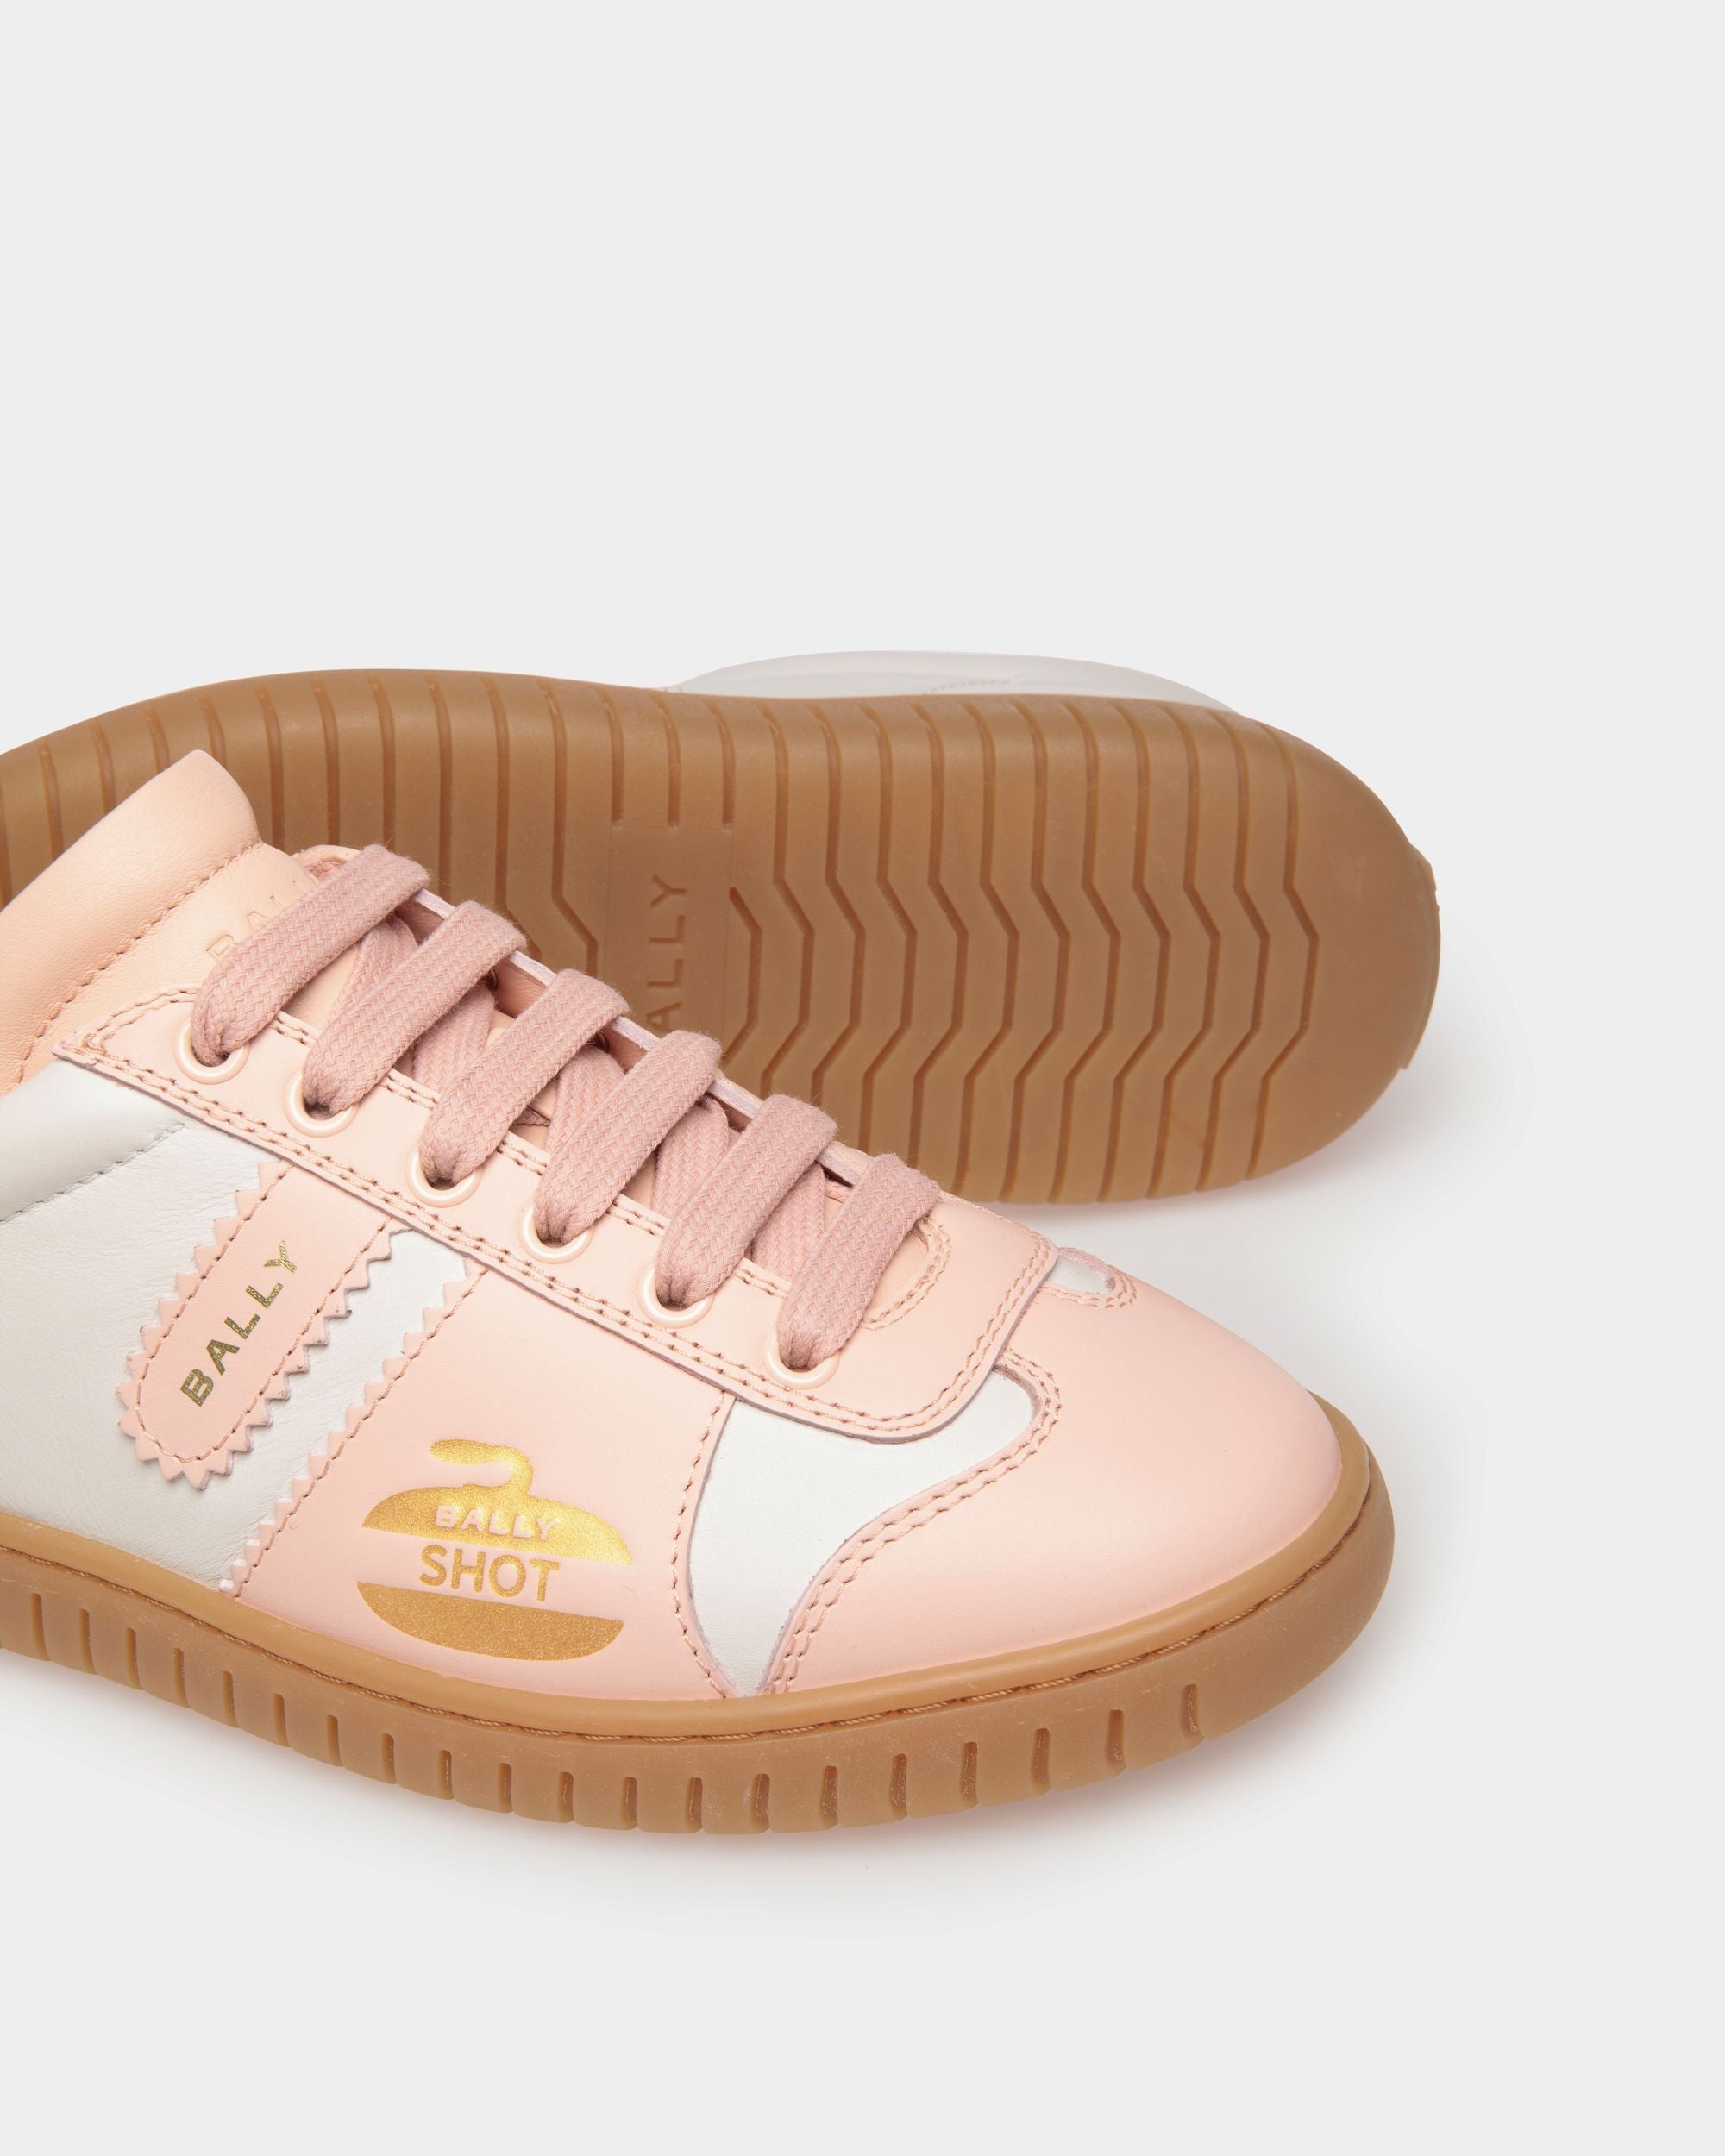 Player | Women's Sneaker in White and Baby Pink Leather | Bally | Still Life Below